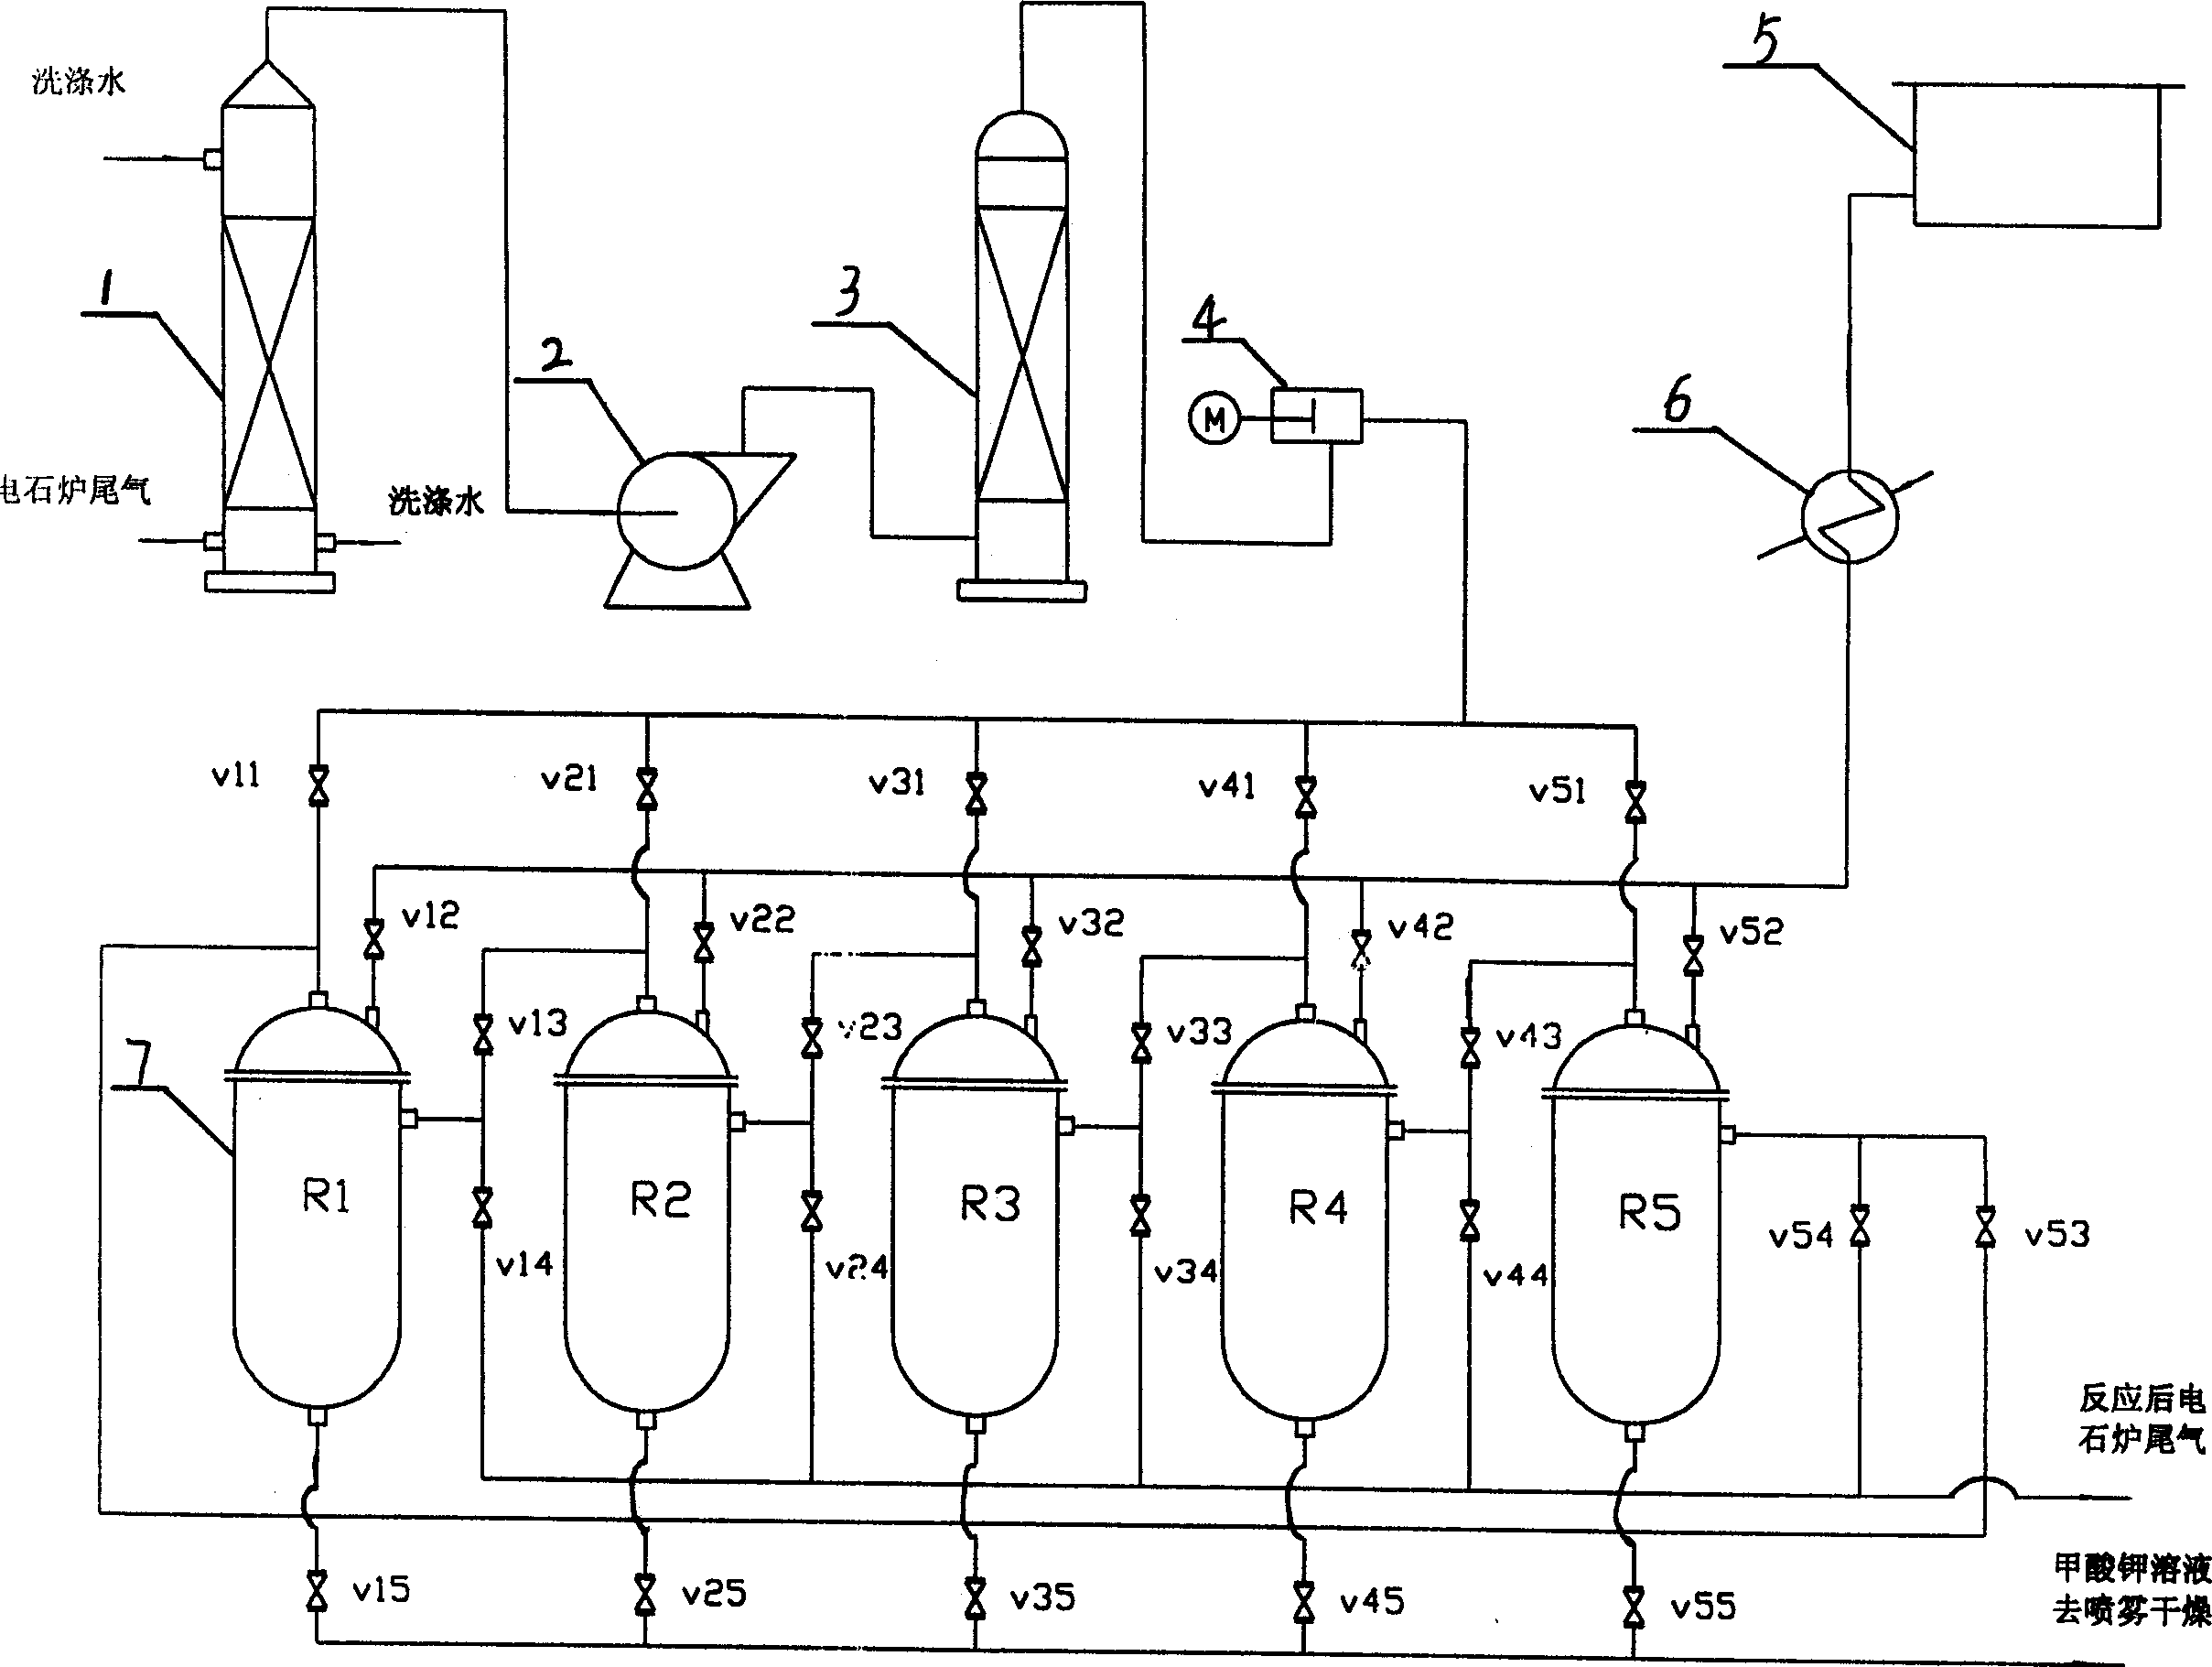 Method for preparing potassium formate and sodium formate from carbide furnace tail gas as raw material